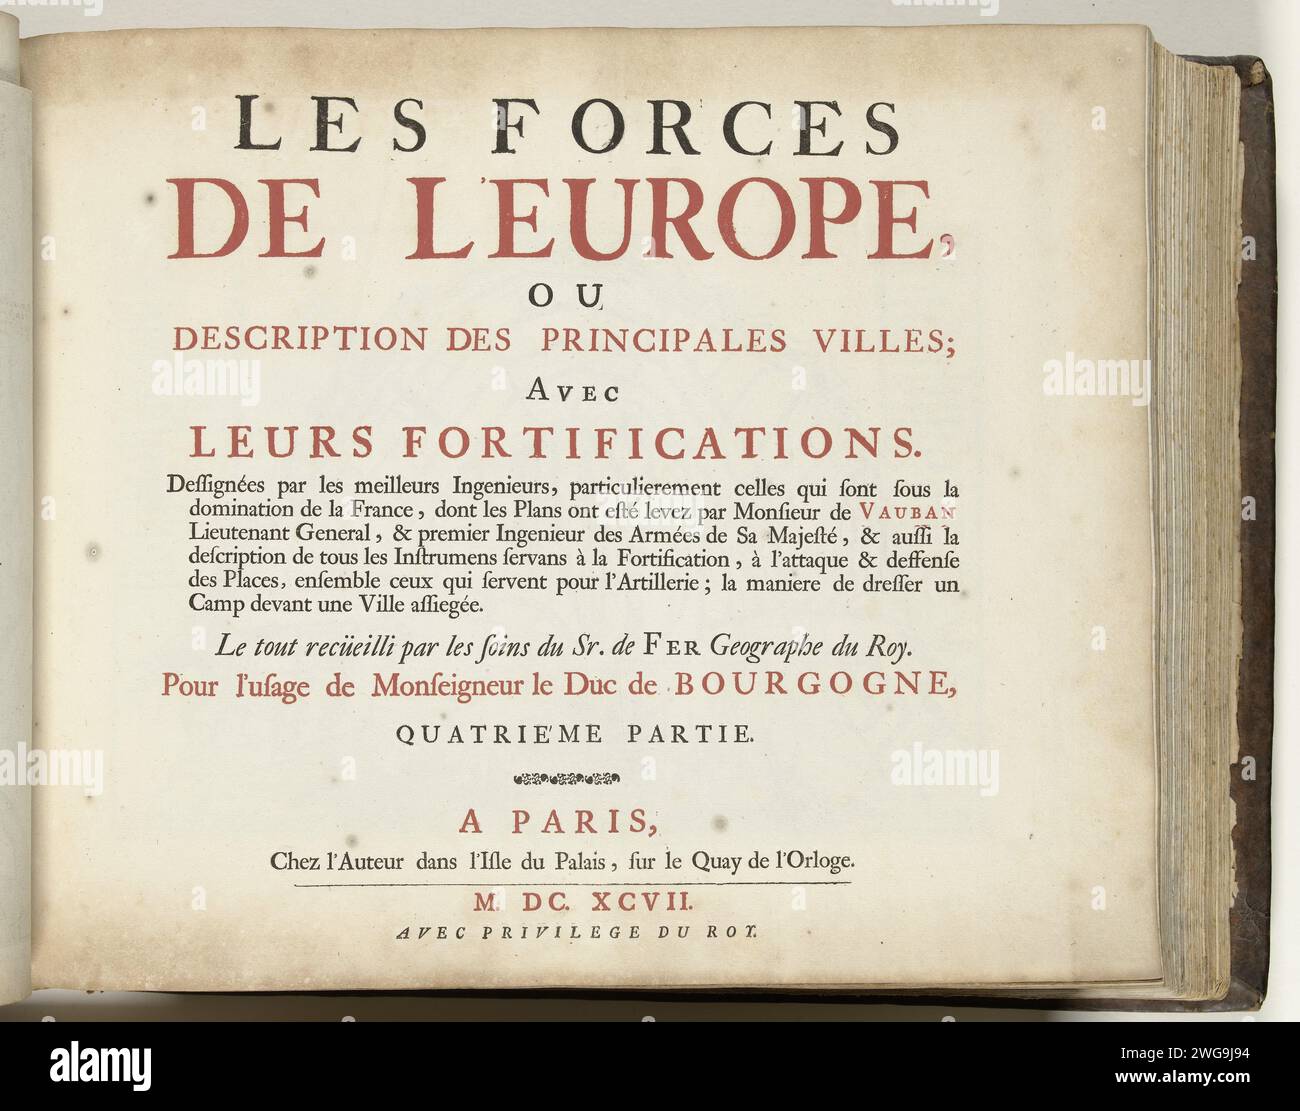 Title page The fourth part of the print work: Nicolas de Fer, Les Forces de l'Europe, 1696, 1697  Title page from 1697 printed in black and red for the fourth part of the print work in which the eight parts of Les Forces de l'Europe are published between 1693-1697. The printed work consists of 175 plates with plans (from Sébastien Le Prestre, Seigneur de Vauban) of renowned strong cities and fortresses in the Nine Years War. Title in French. Paris paper letterpress printing Stock Photo